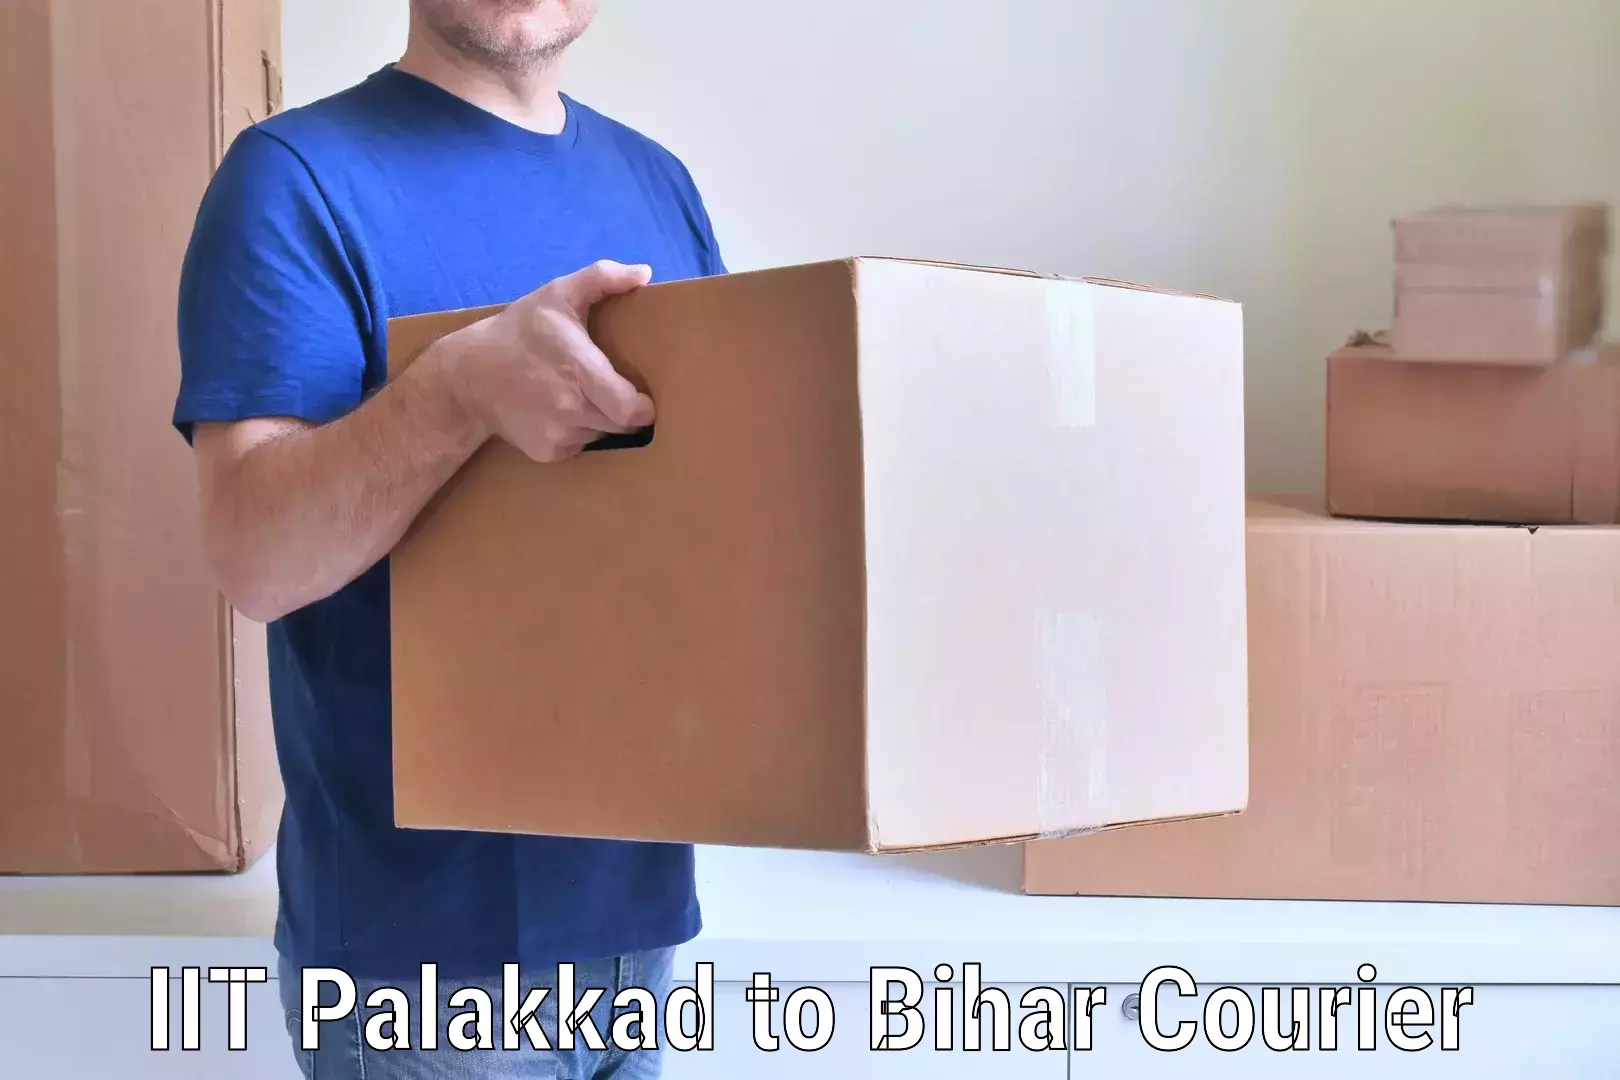 Professional moving company in IIT Palakkad to Sharfuddinpur